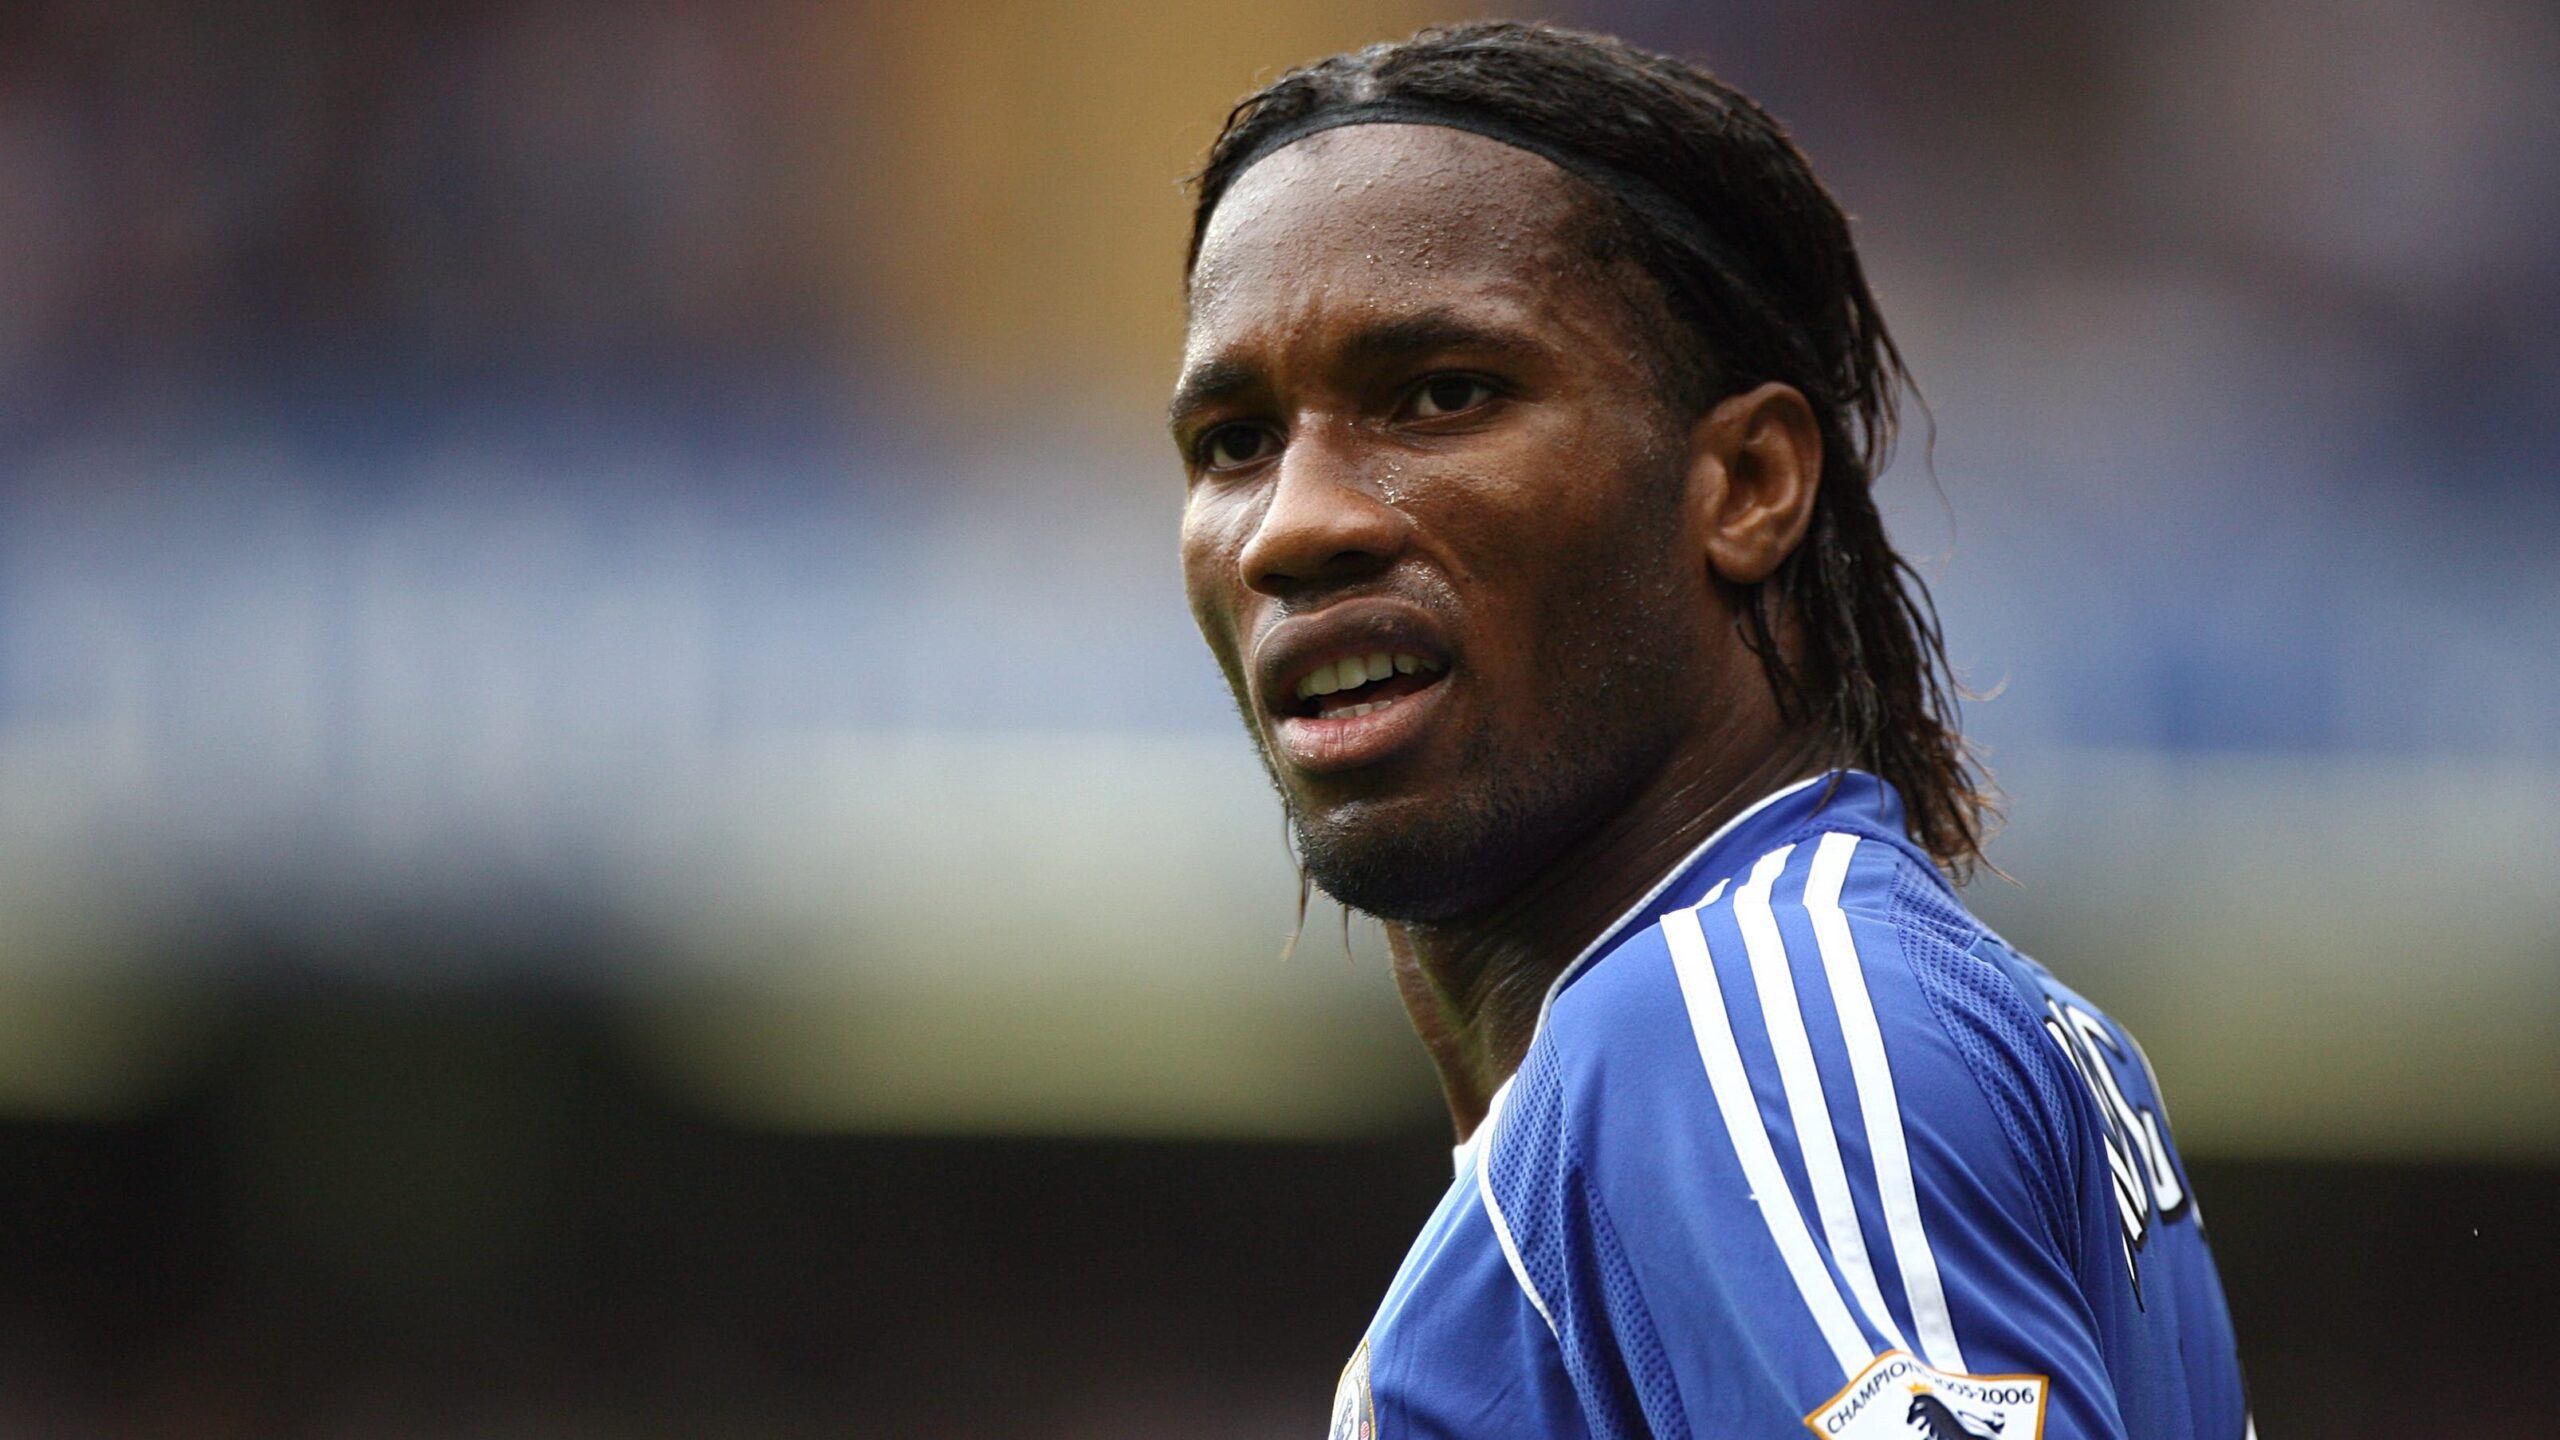 Didier Drogba: The Chelsea Legend Who Used Football To Stop Civil War In Ivory Coast